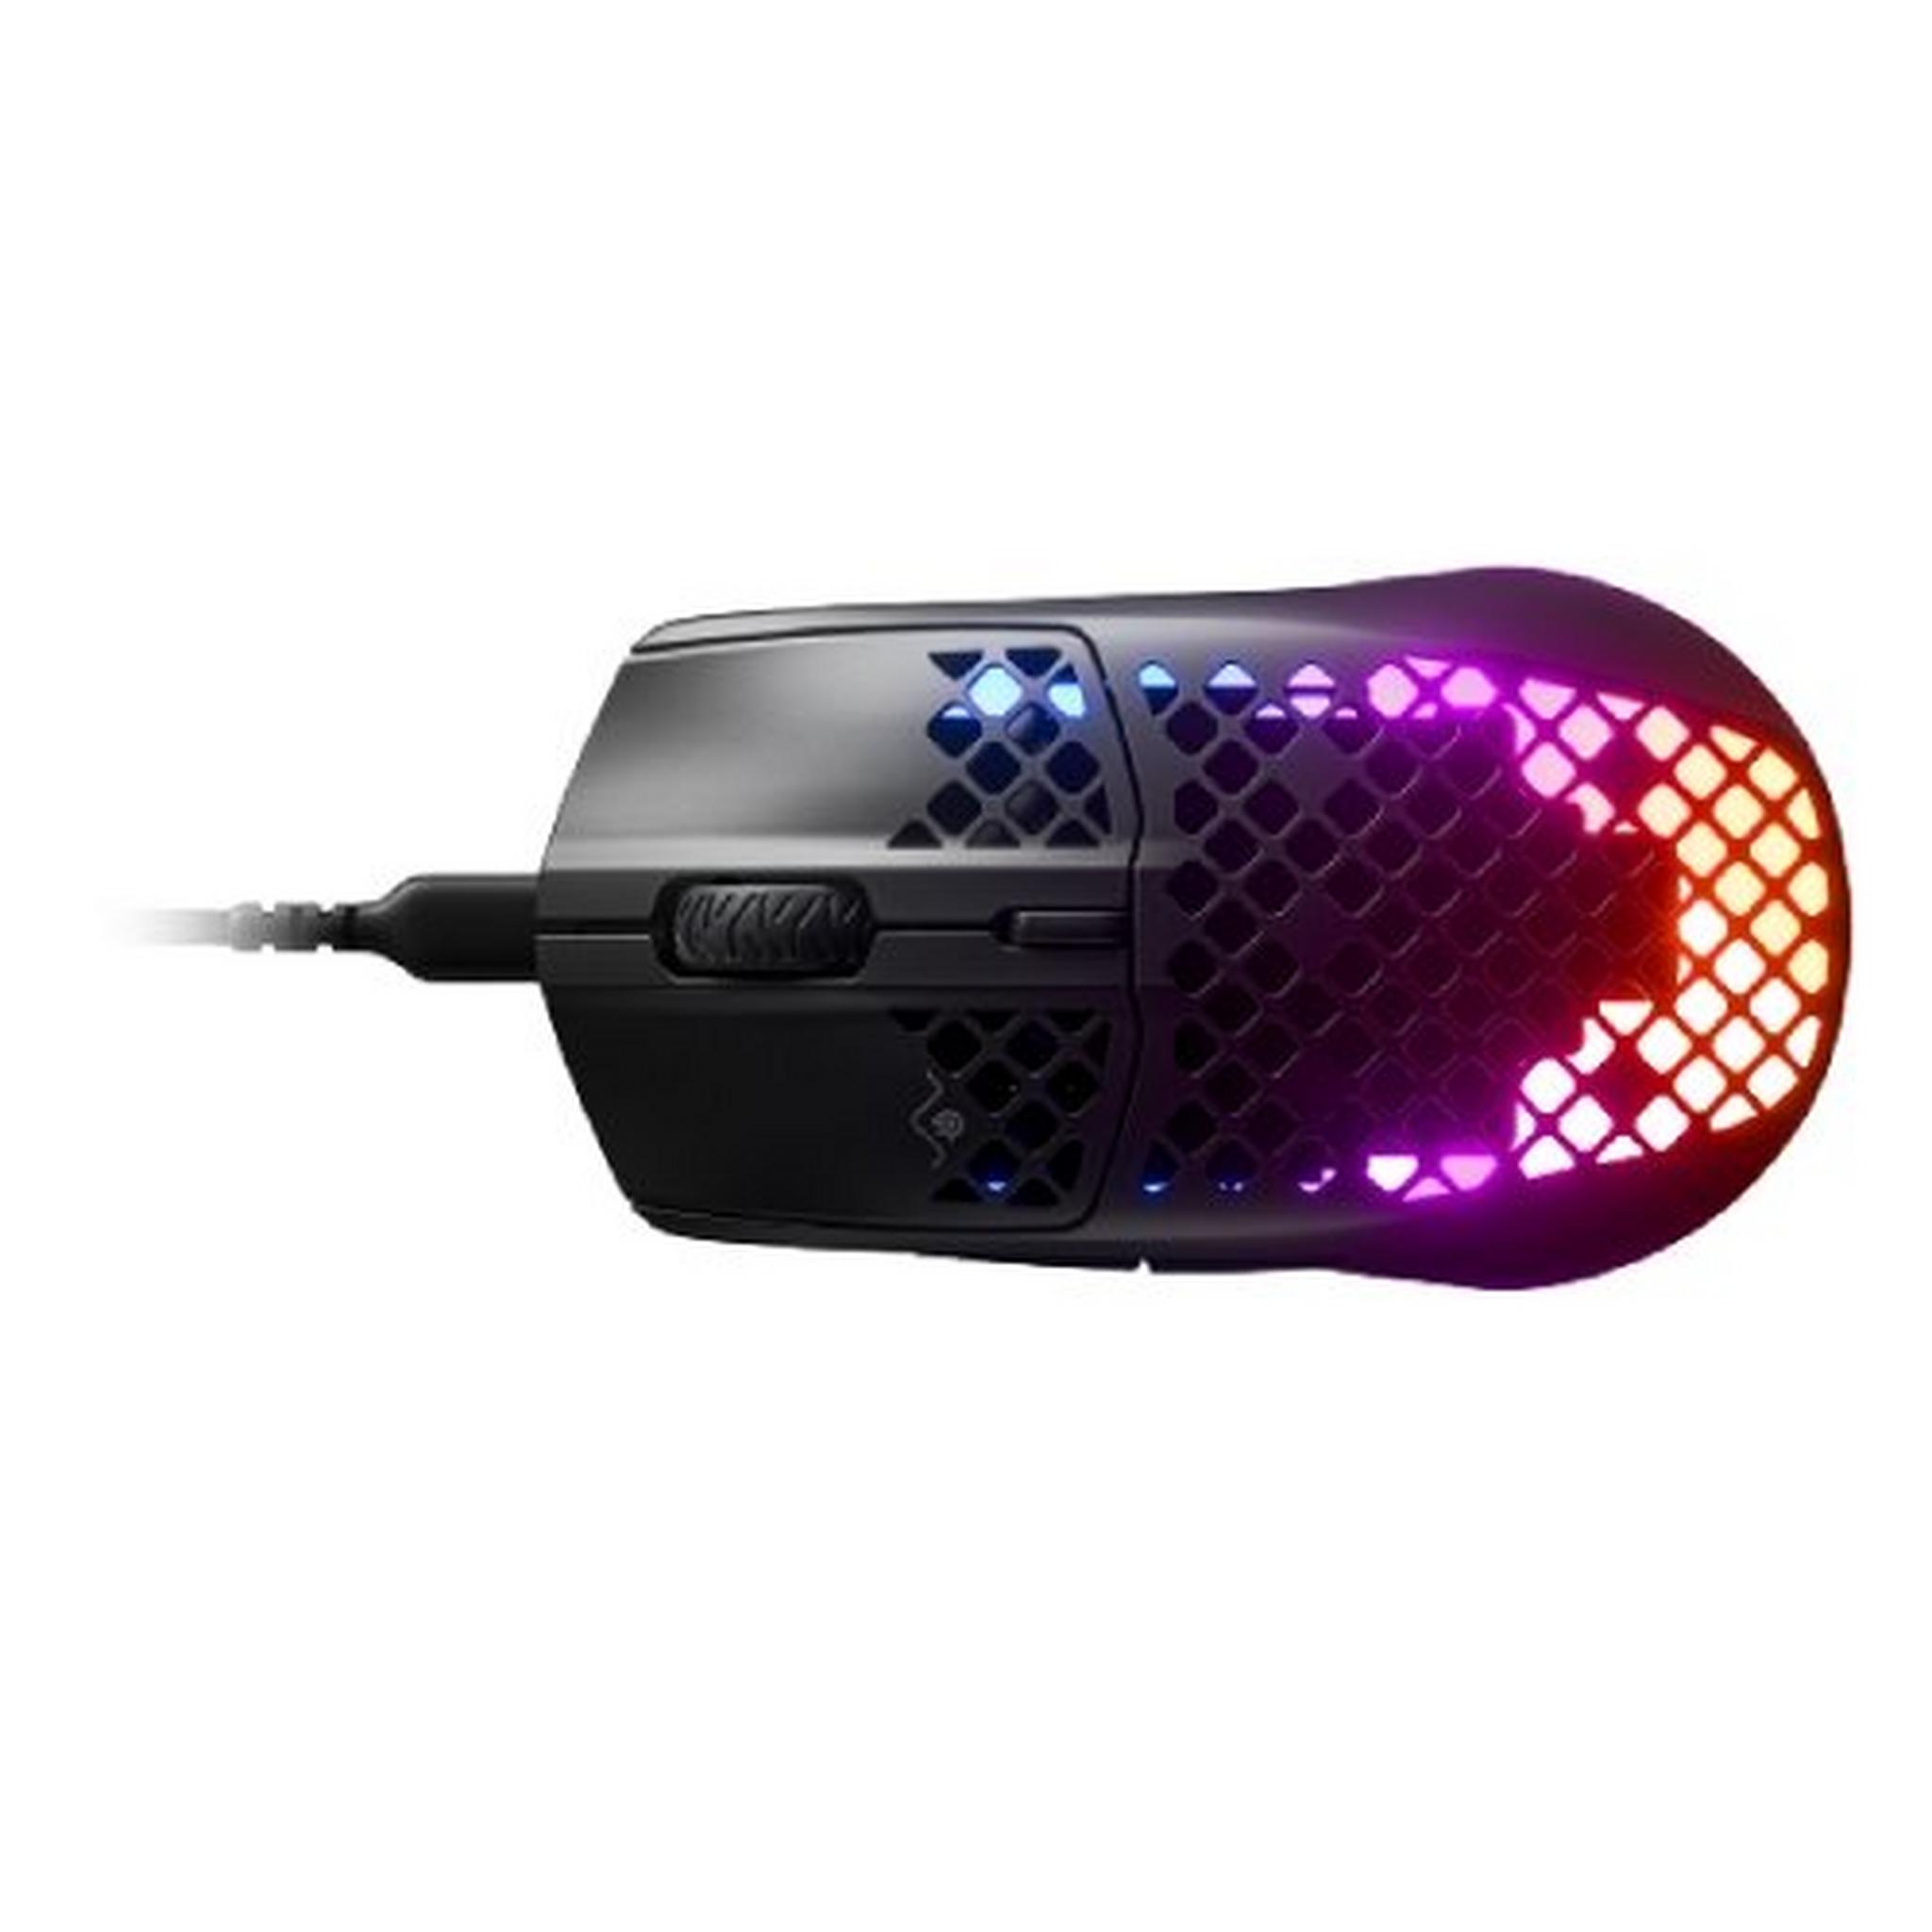 Steelseries Aerox 3 Wired Gaming Mouse